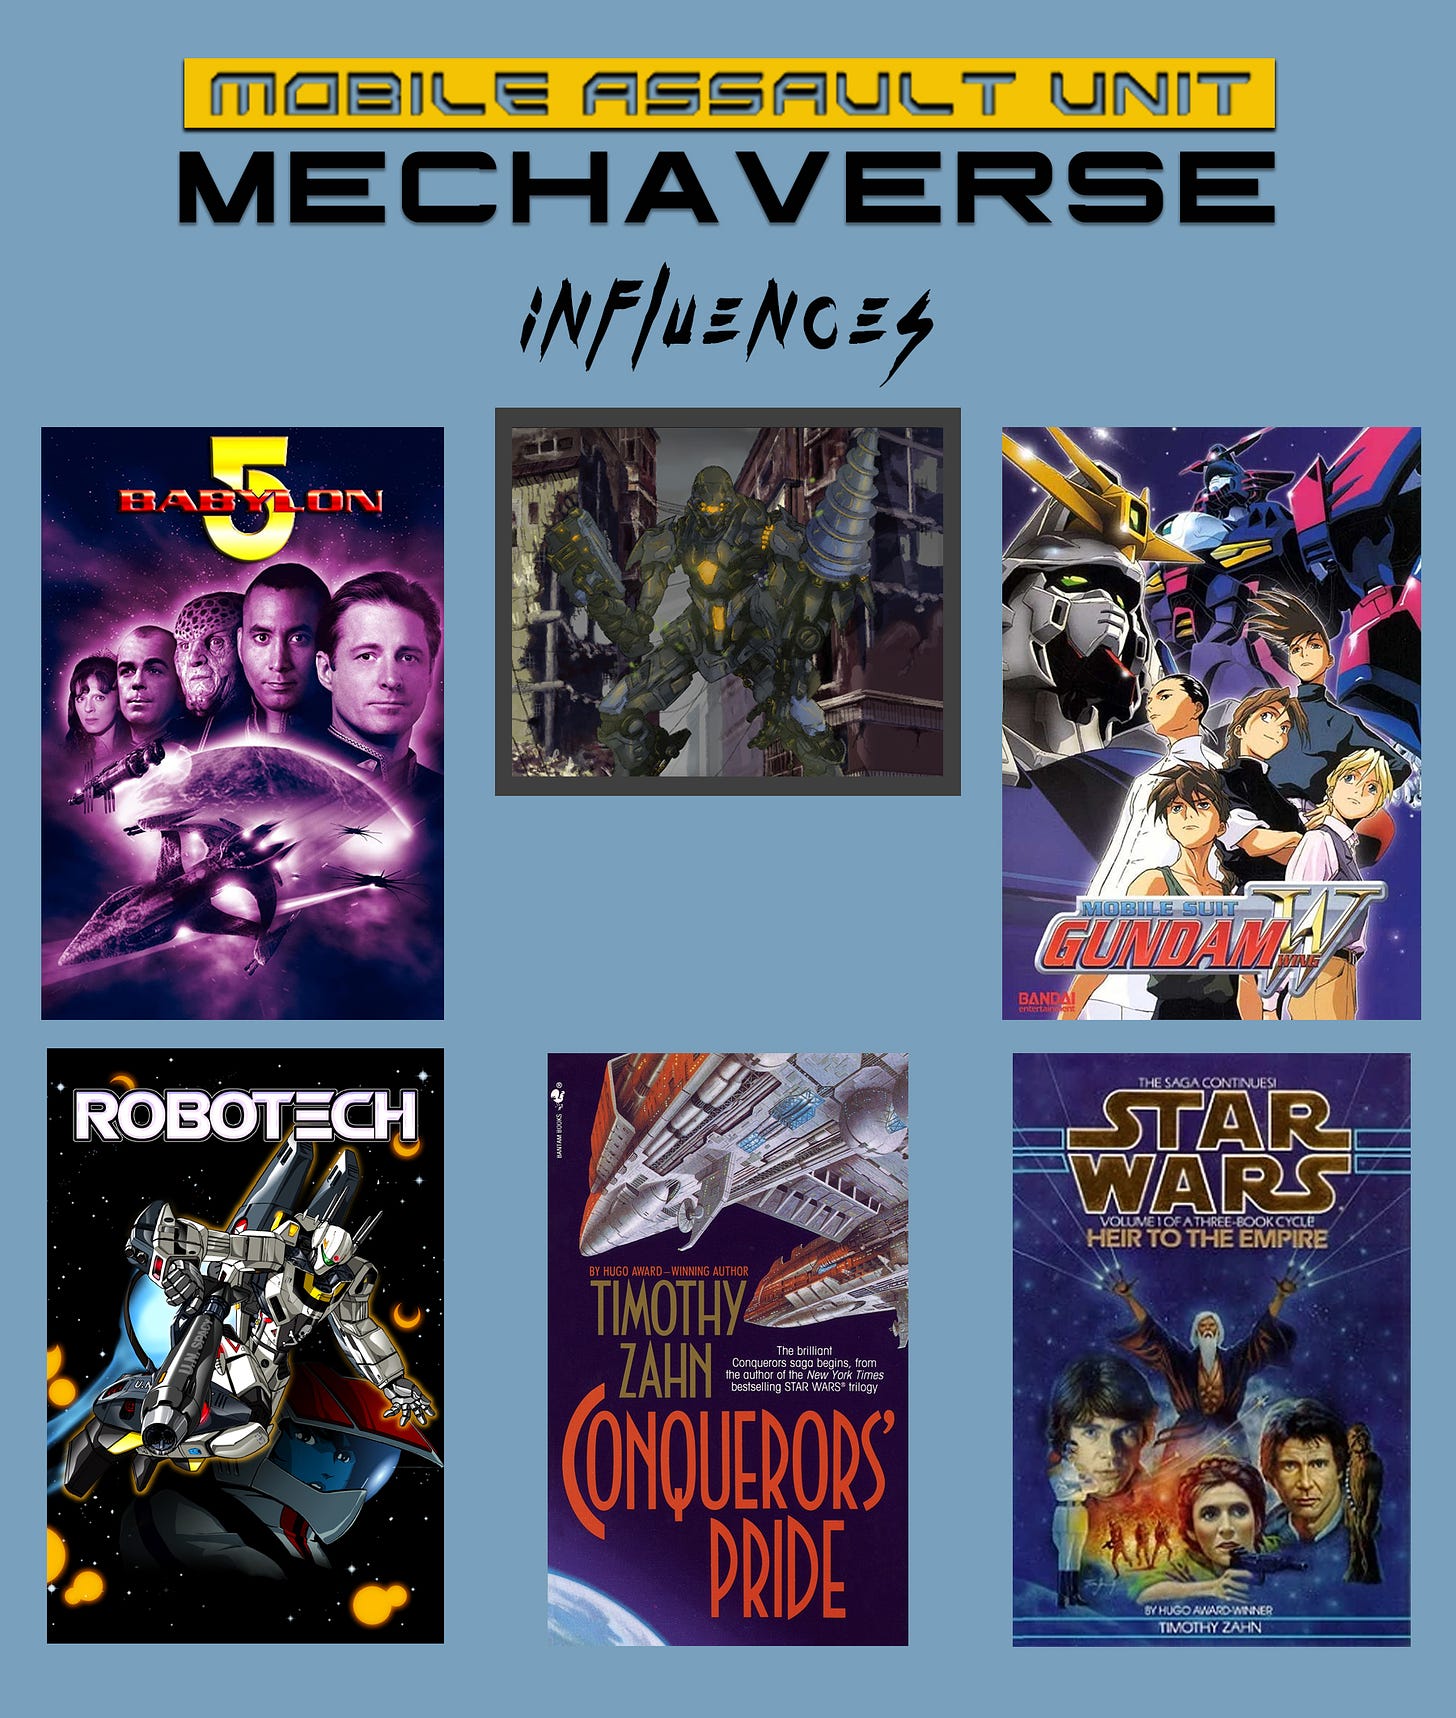 A graphic which identifies the shows Babylon 5, Gundam Wing and Robotech, as well as the books Conquerors Pride and Heir to the Empire as influences for the Mechaverse.